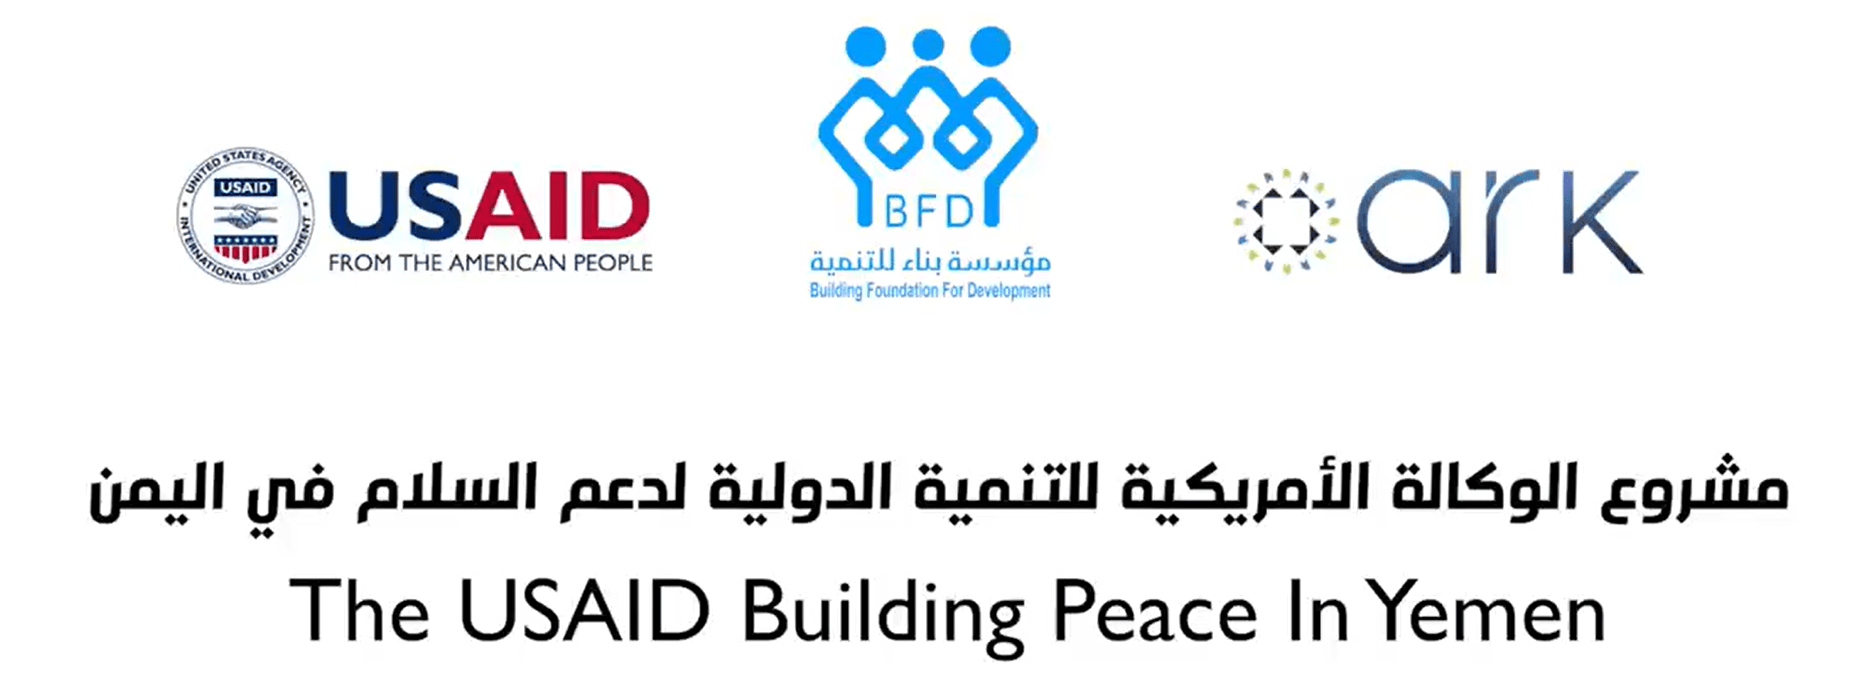 USAID Peace Support Project in Yemen: Building Community Capacities for Conflict Resolution and Climate Change